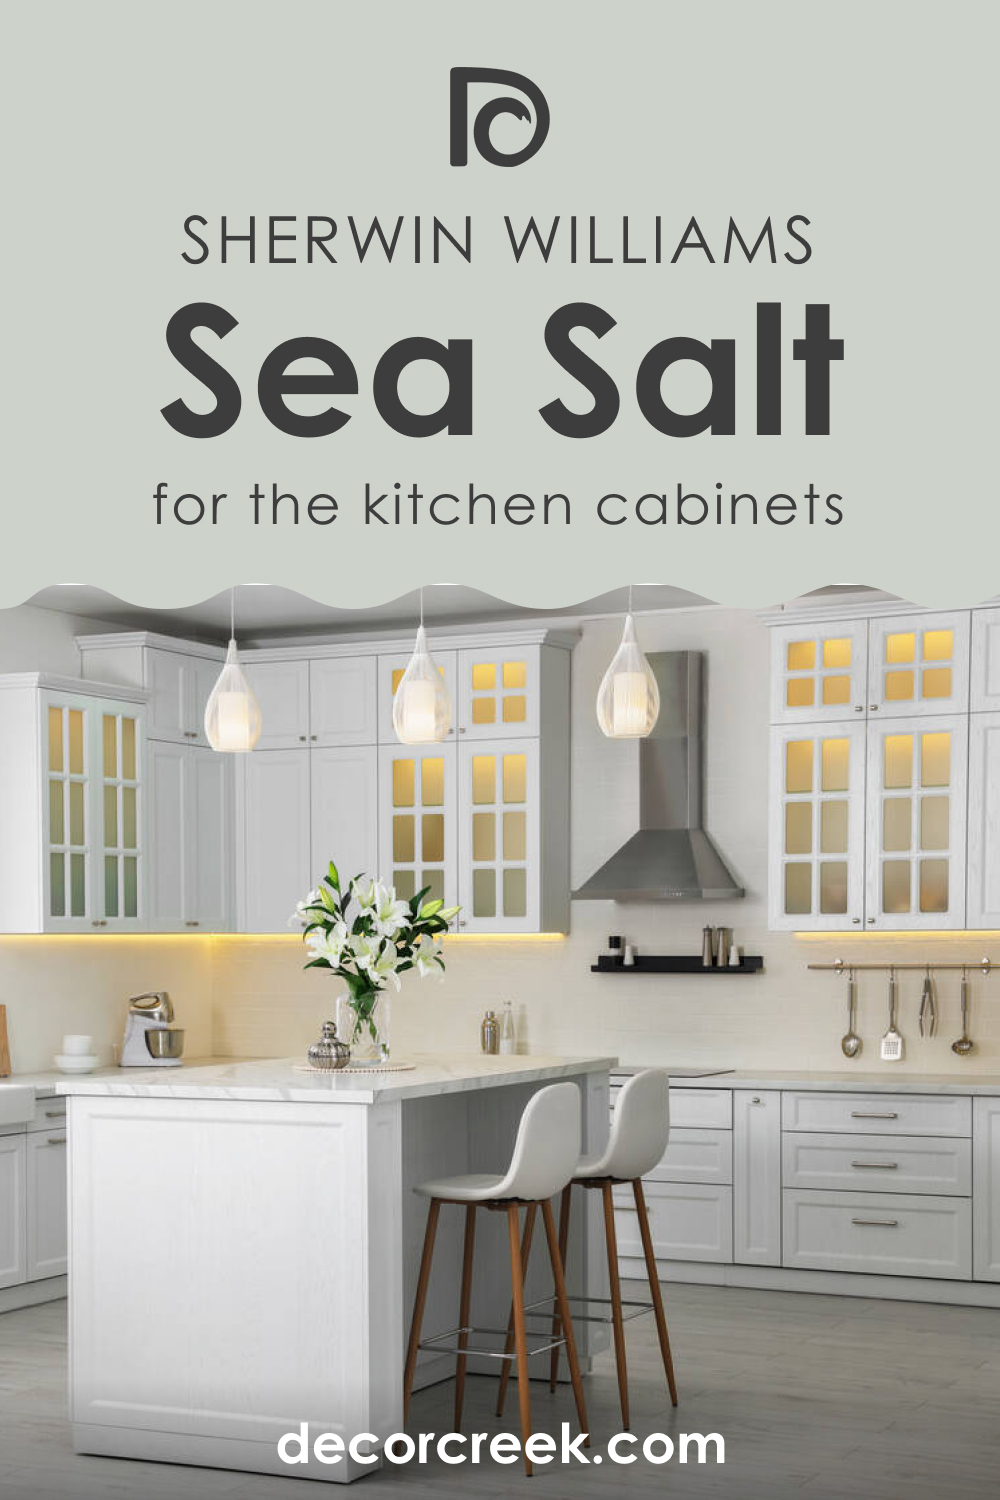 How to Use Sea Salt SW 6204 for the Kitchen Cabinets?